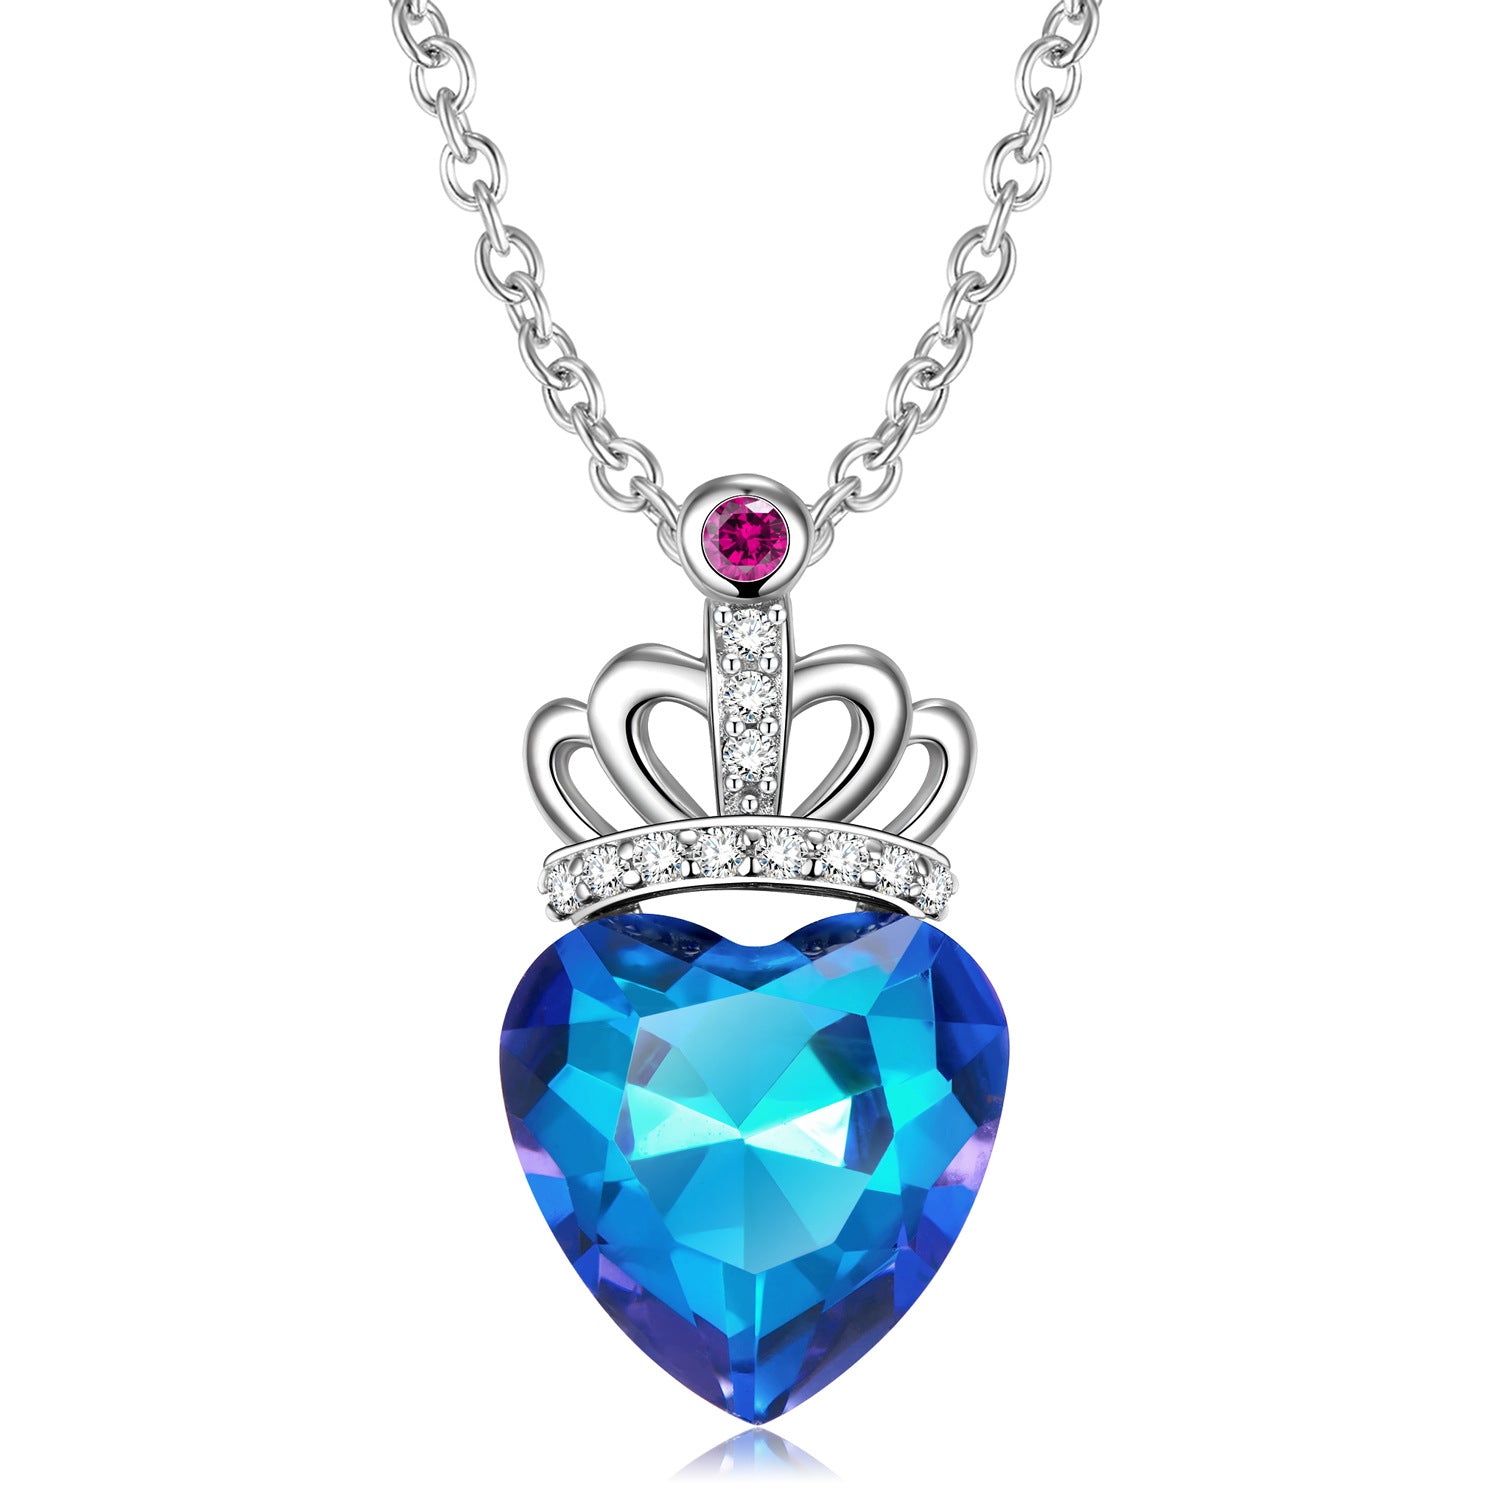 blue-light-peach-heart-crown-necklace-s925-sterling-silver